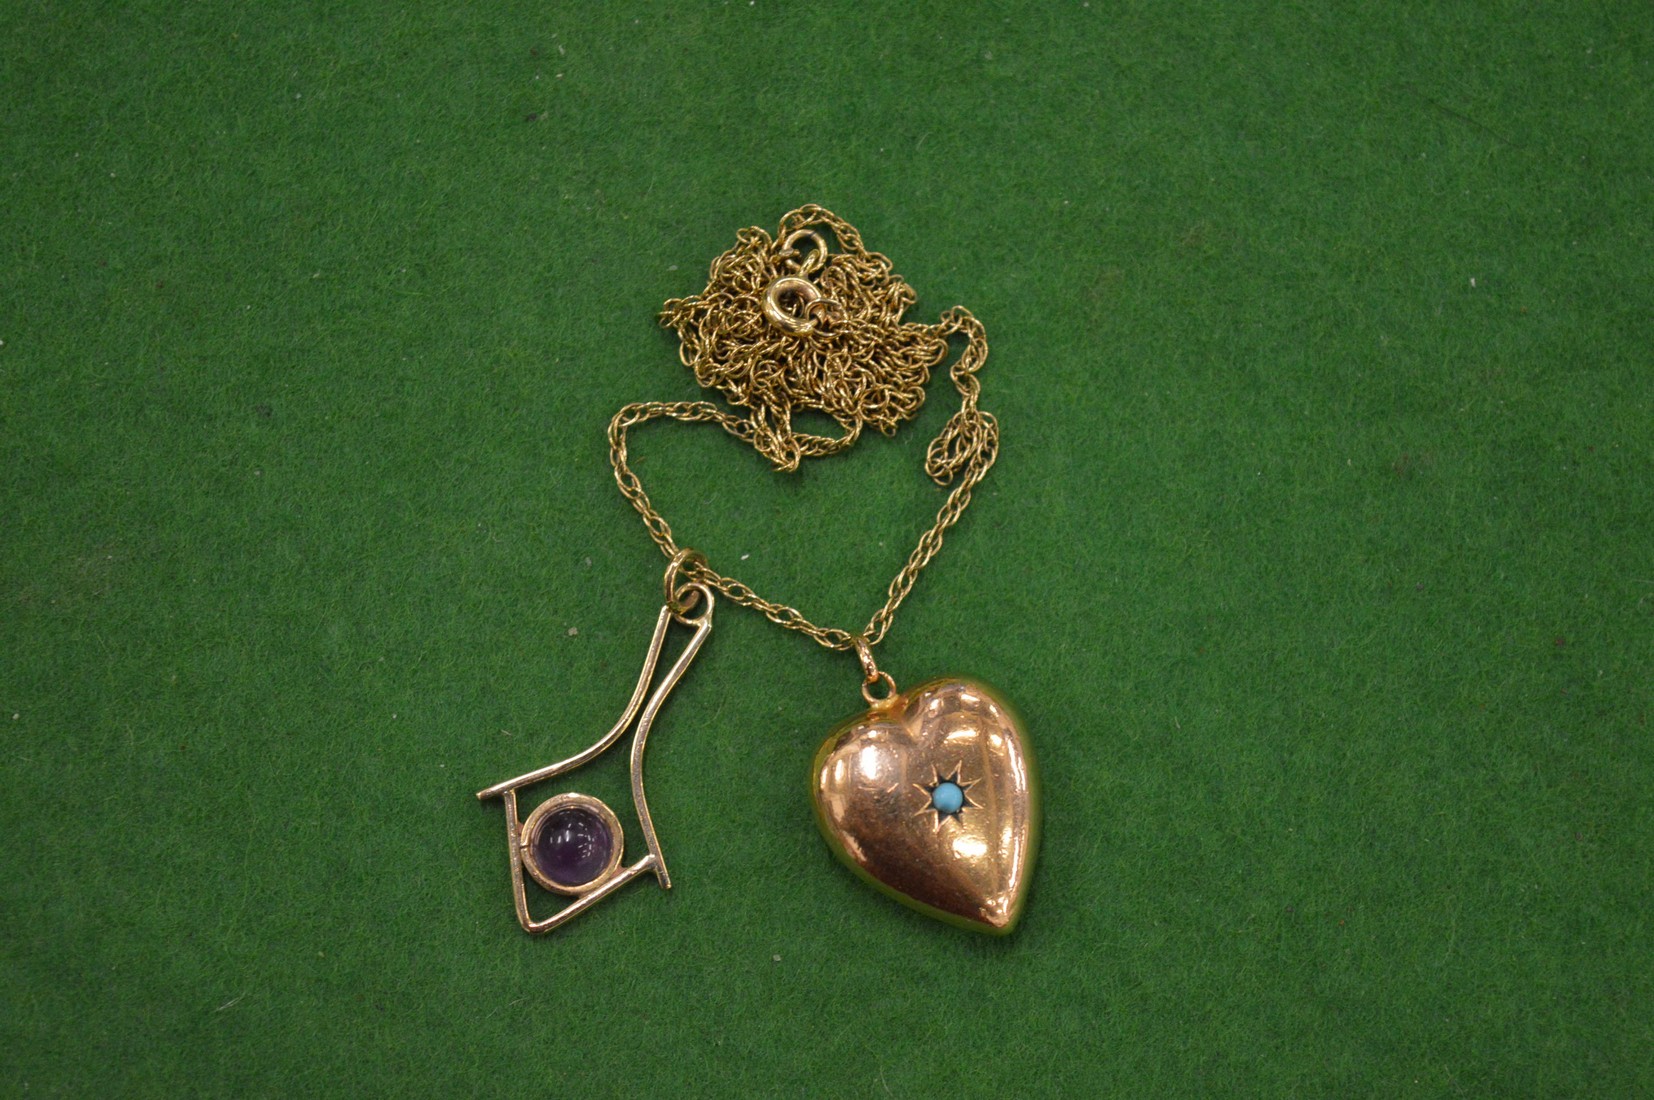 A 9ct gold heart shaped locket inset with a turquoise cabochon stone together with a 9ct gold